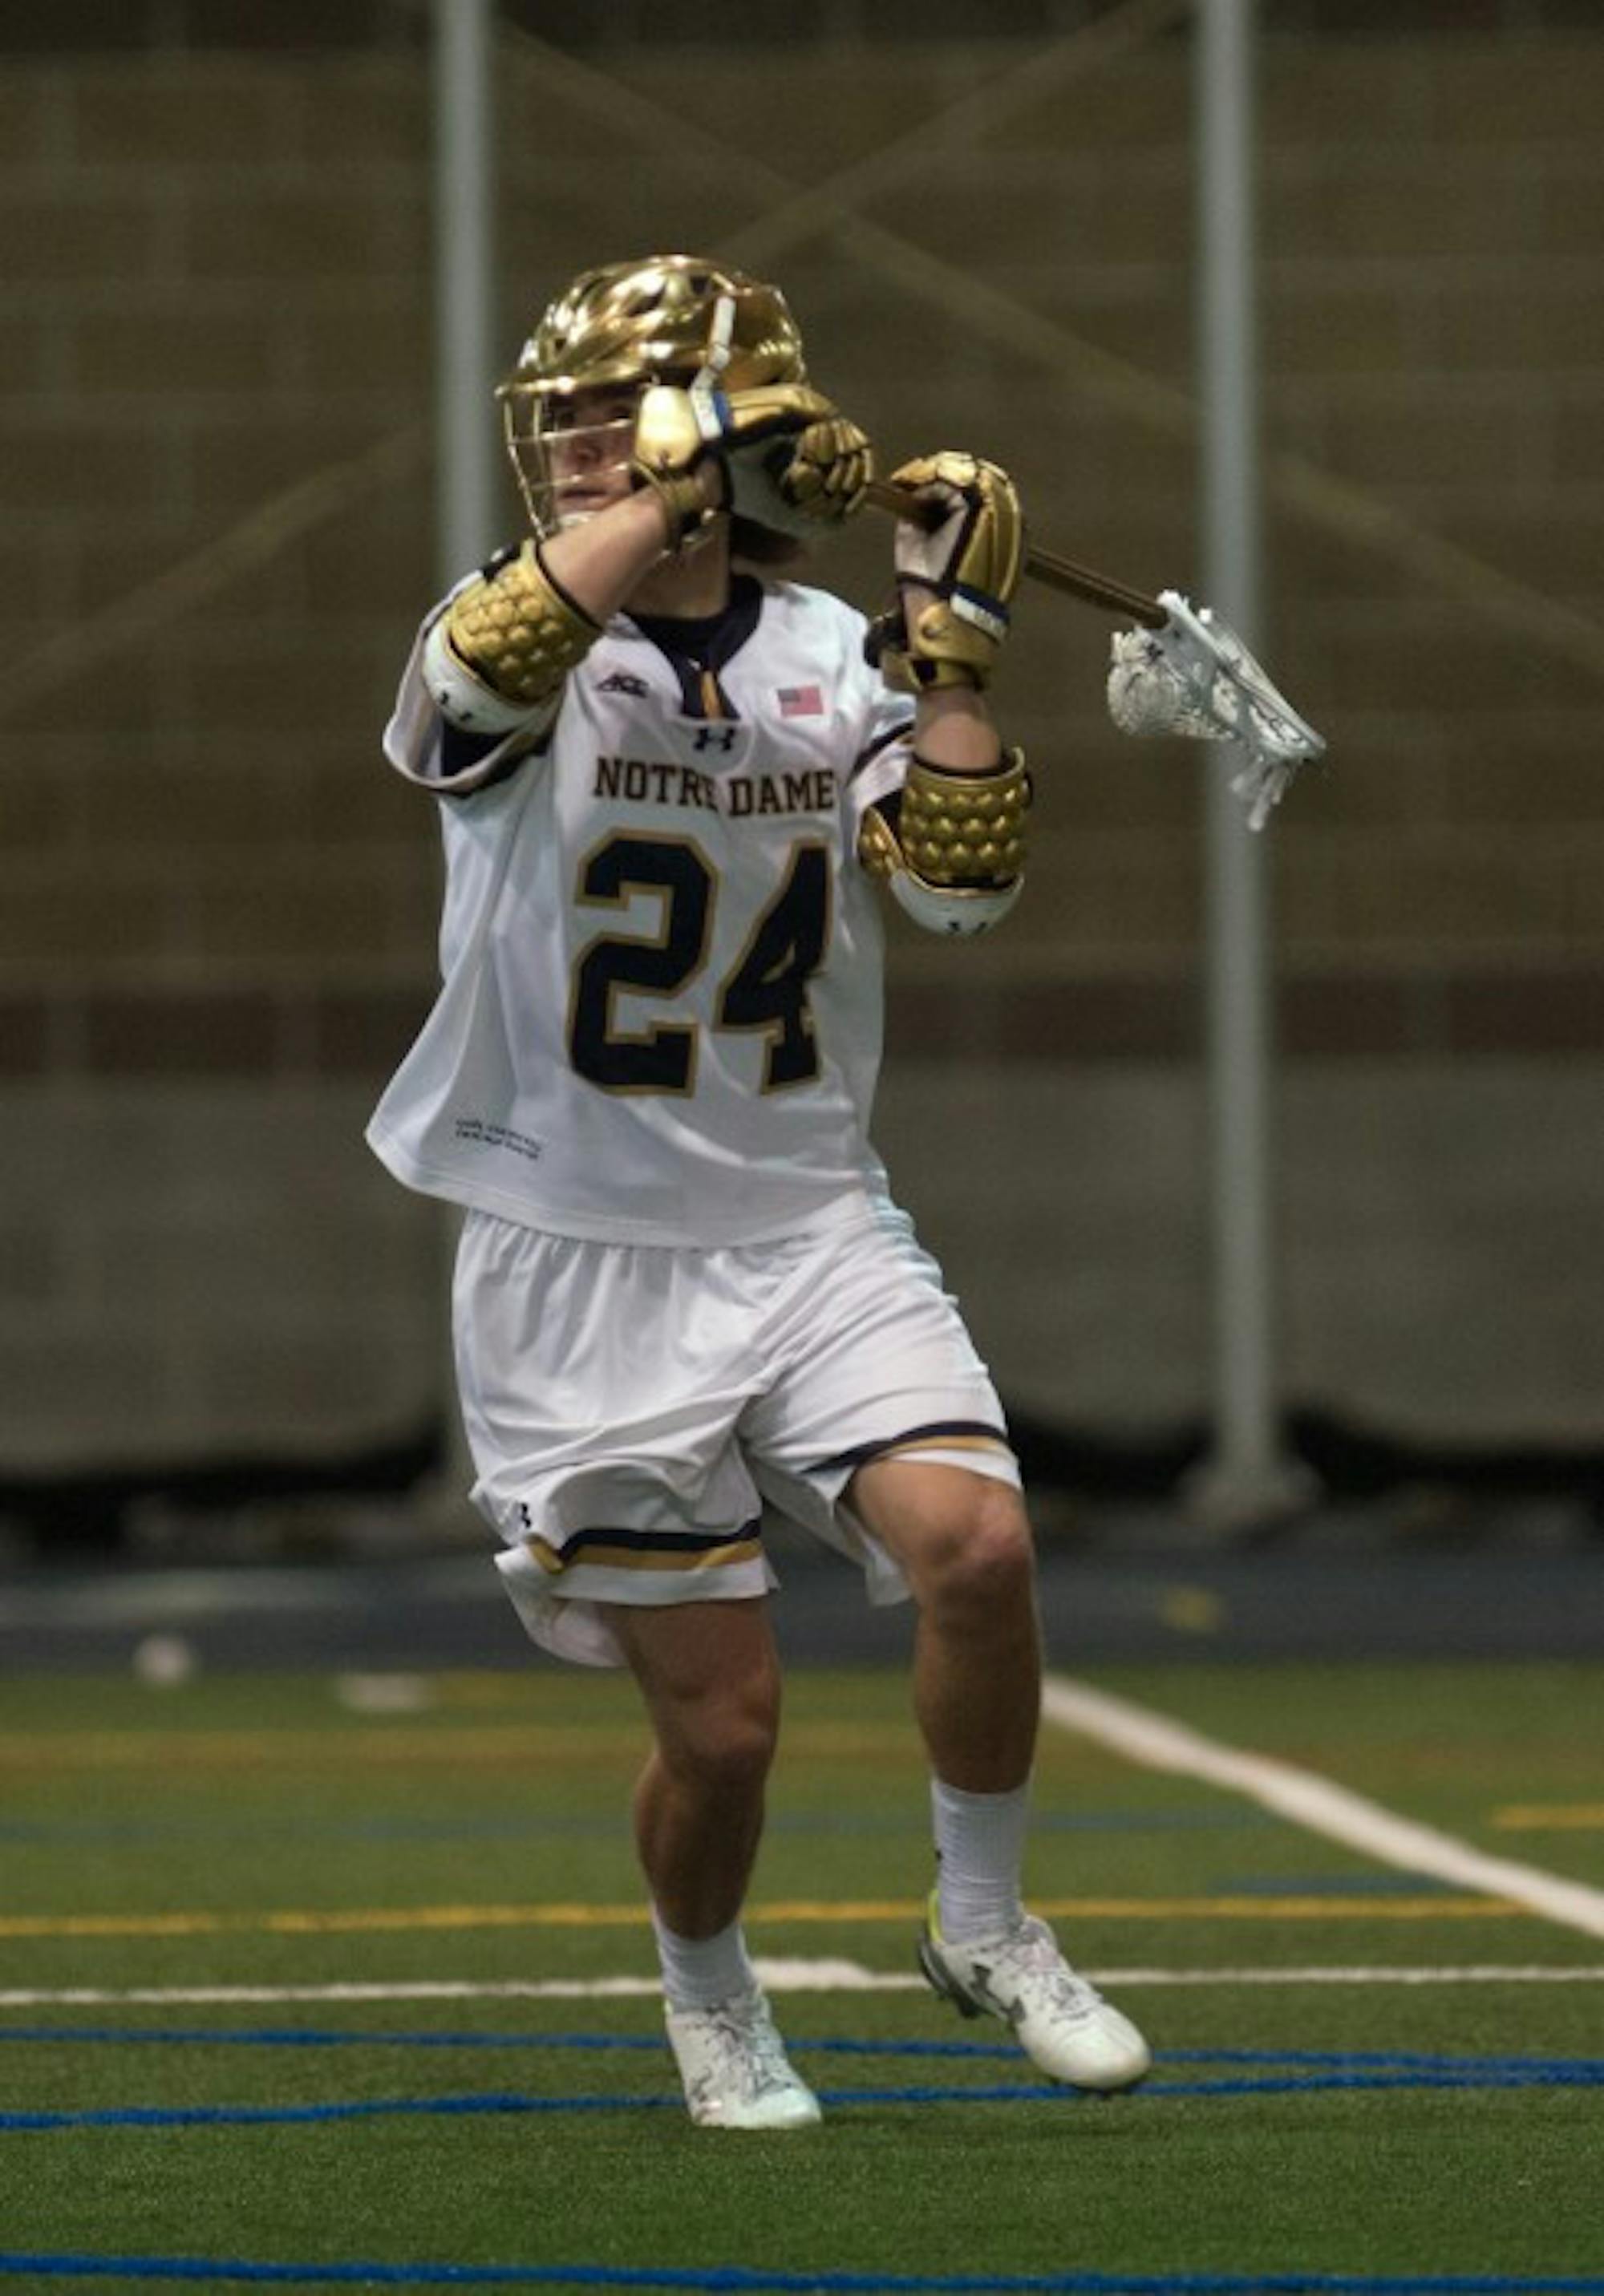 Sophomore attack Mikey Wynne shoots during Notre Dame’s 14-5 win over Detroit on Feb. 27. Wynne tallied six goals during the game, bringing his season total to nine.  He also added an assist in the win.